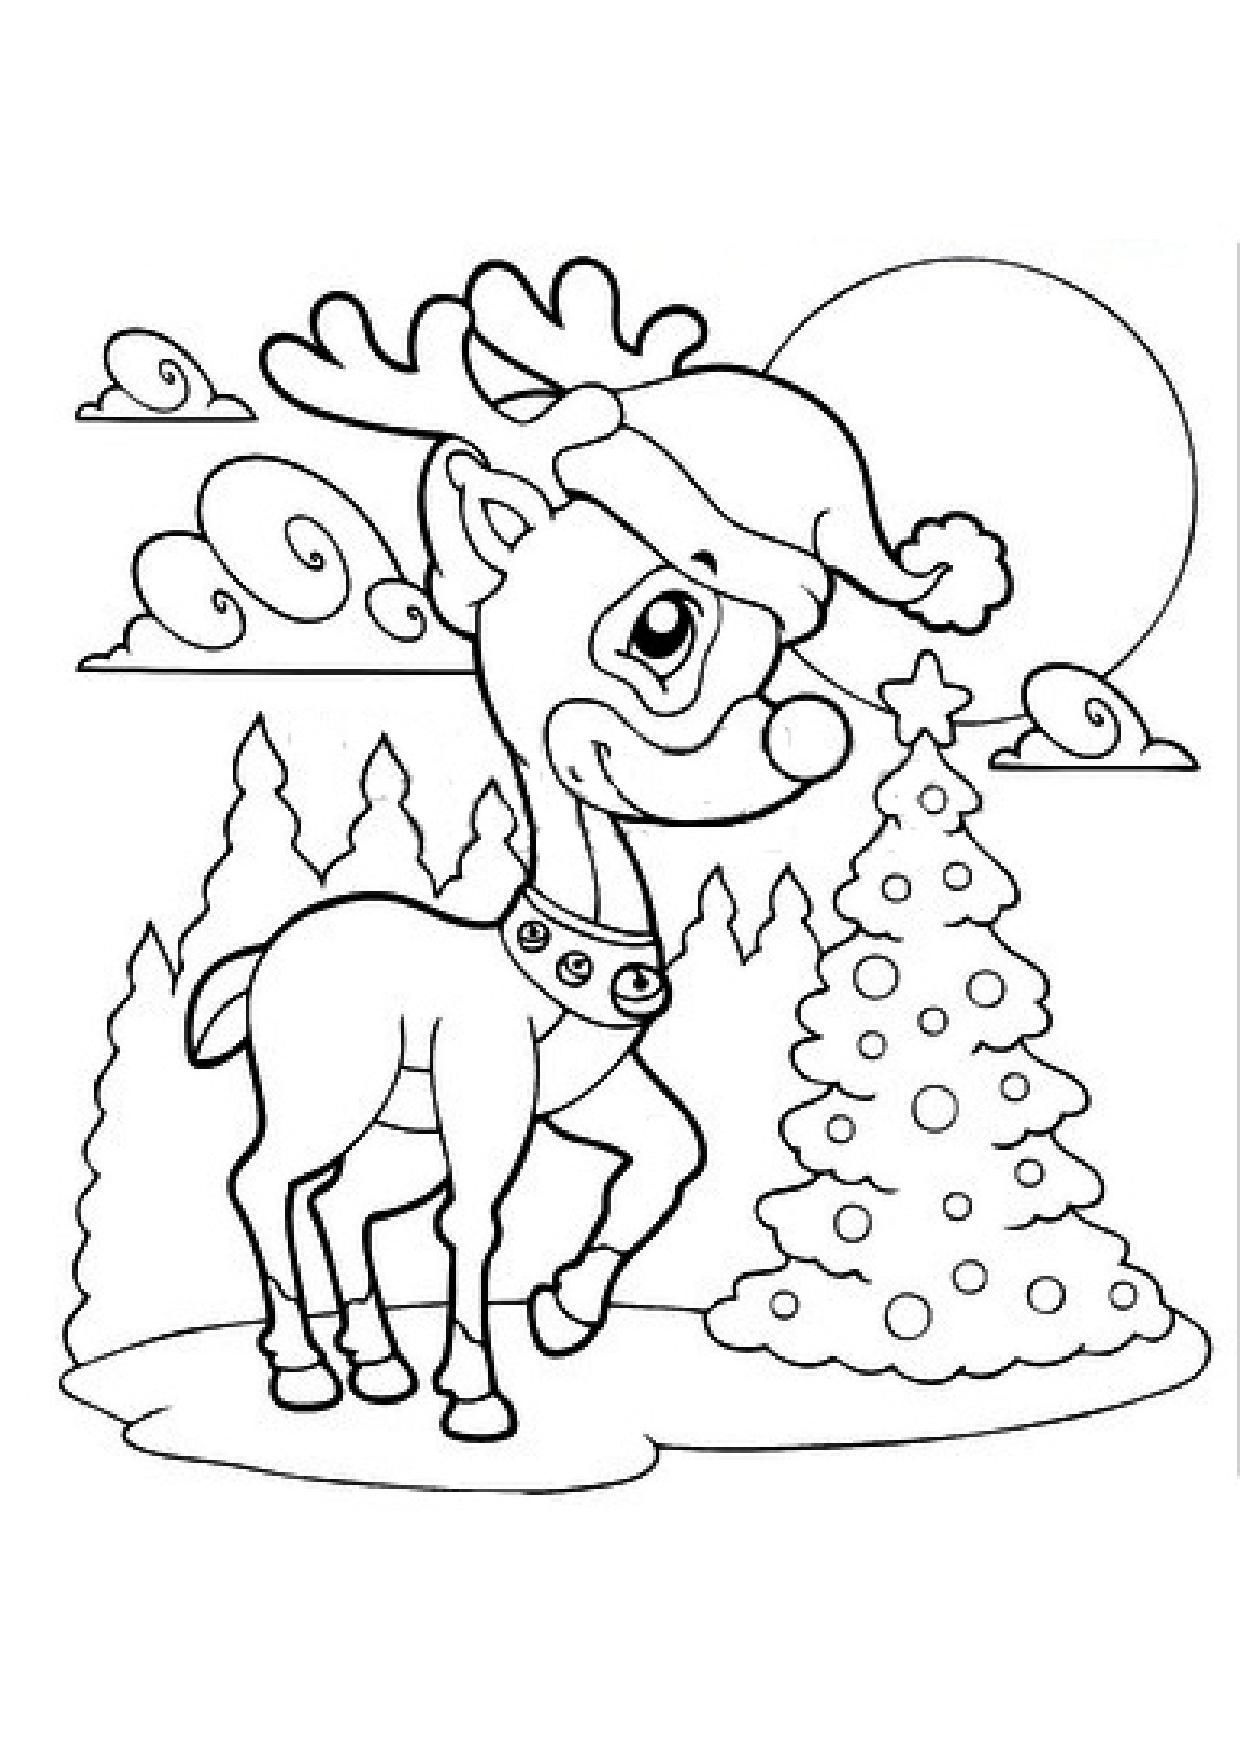 Sapin Noel Coloriage Impressionnant Photos Coloriage Noel